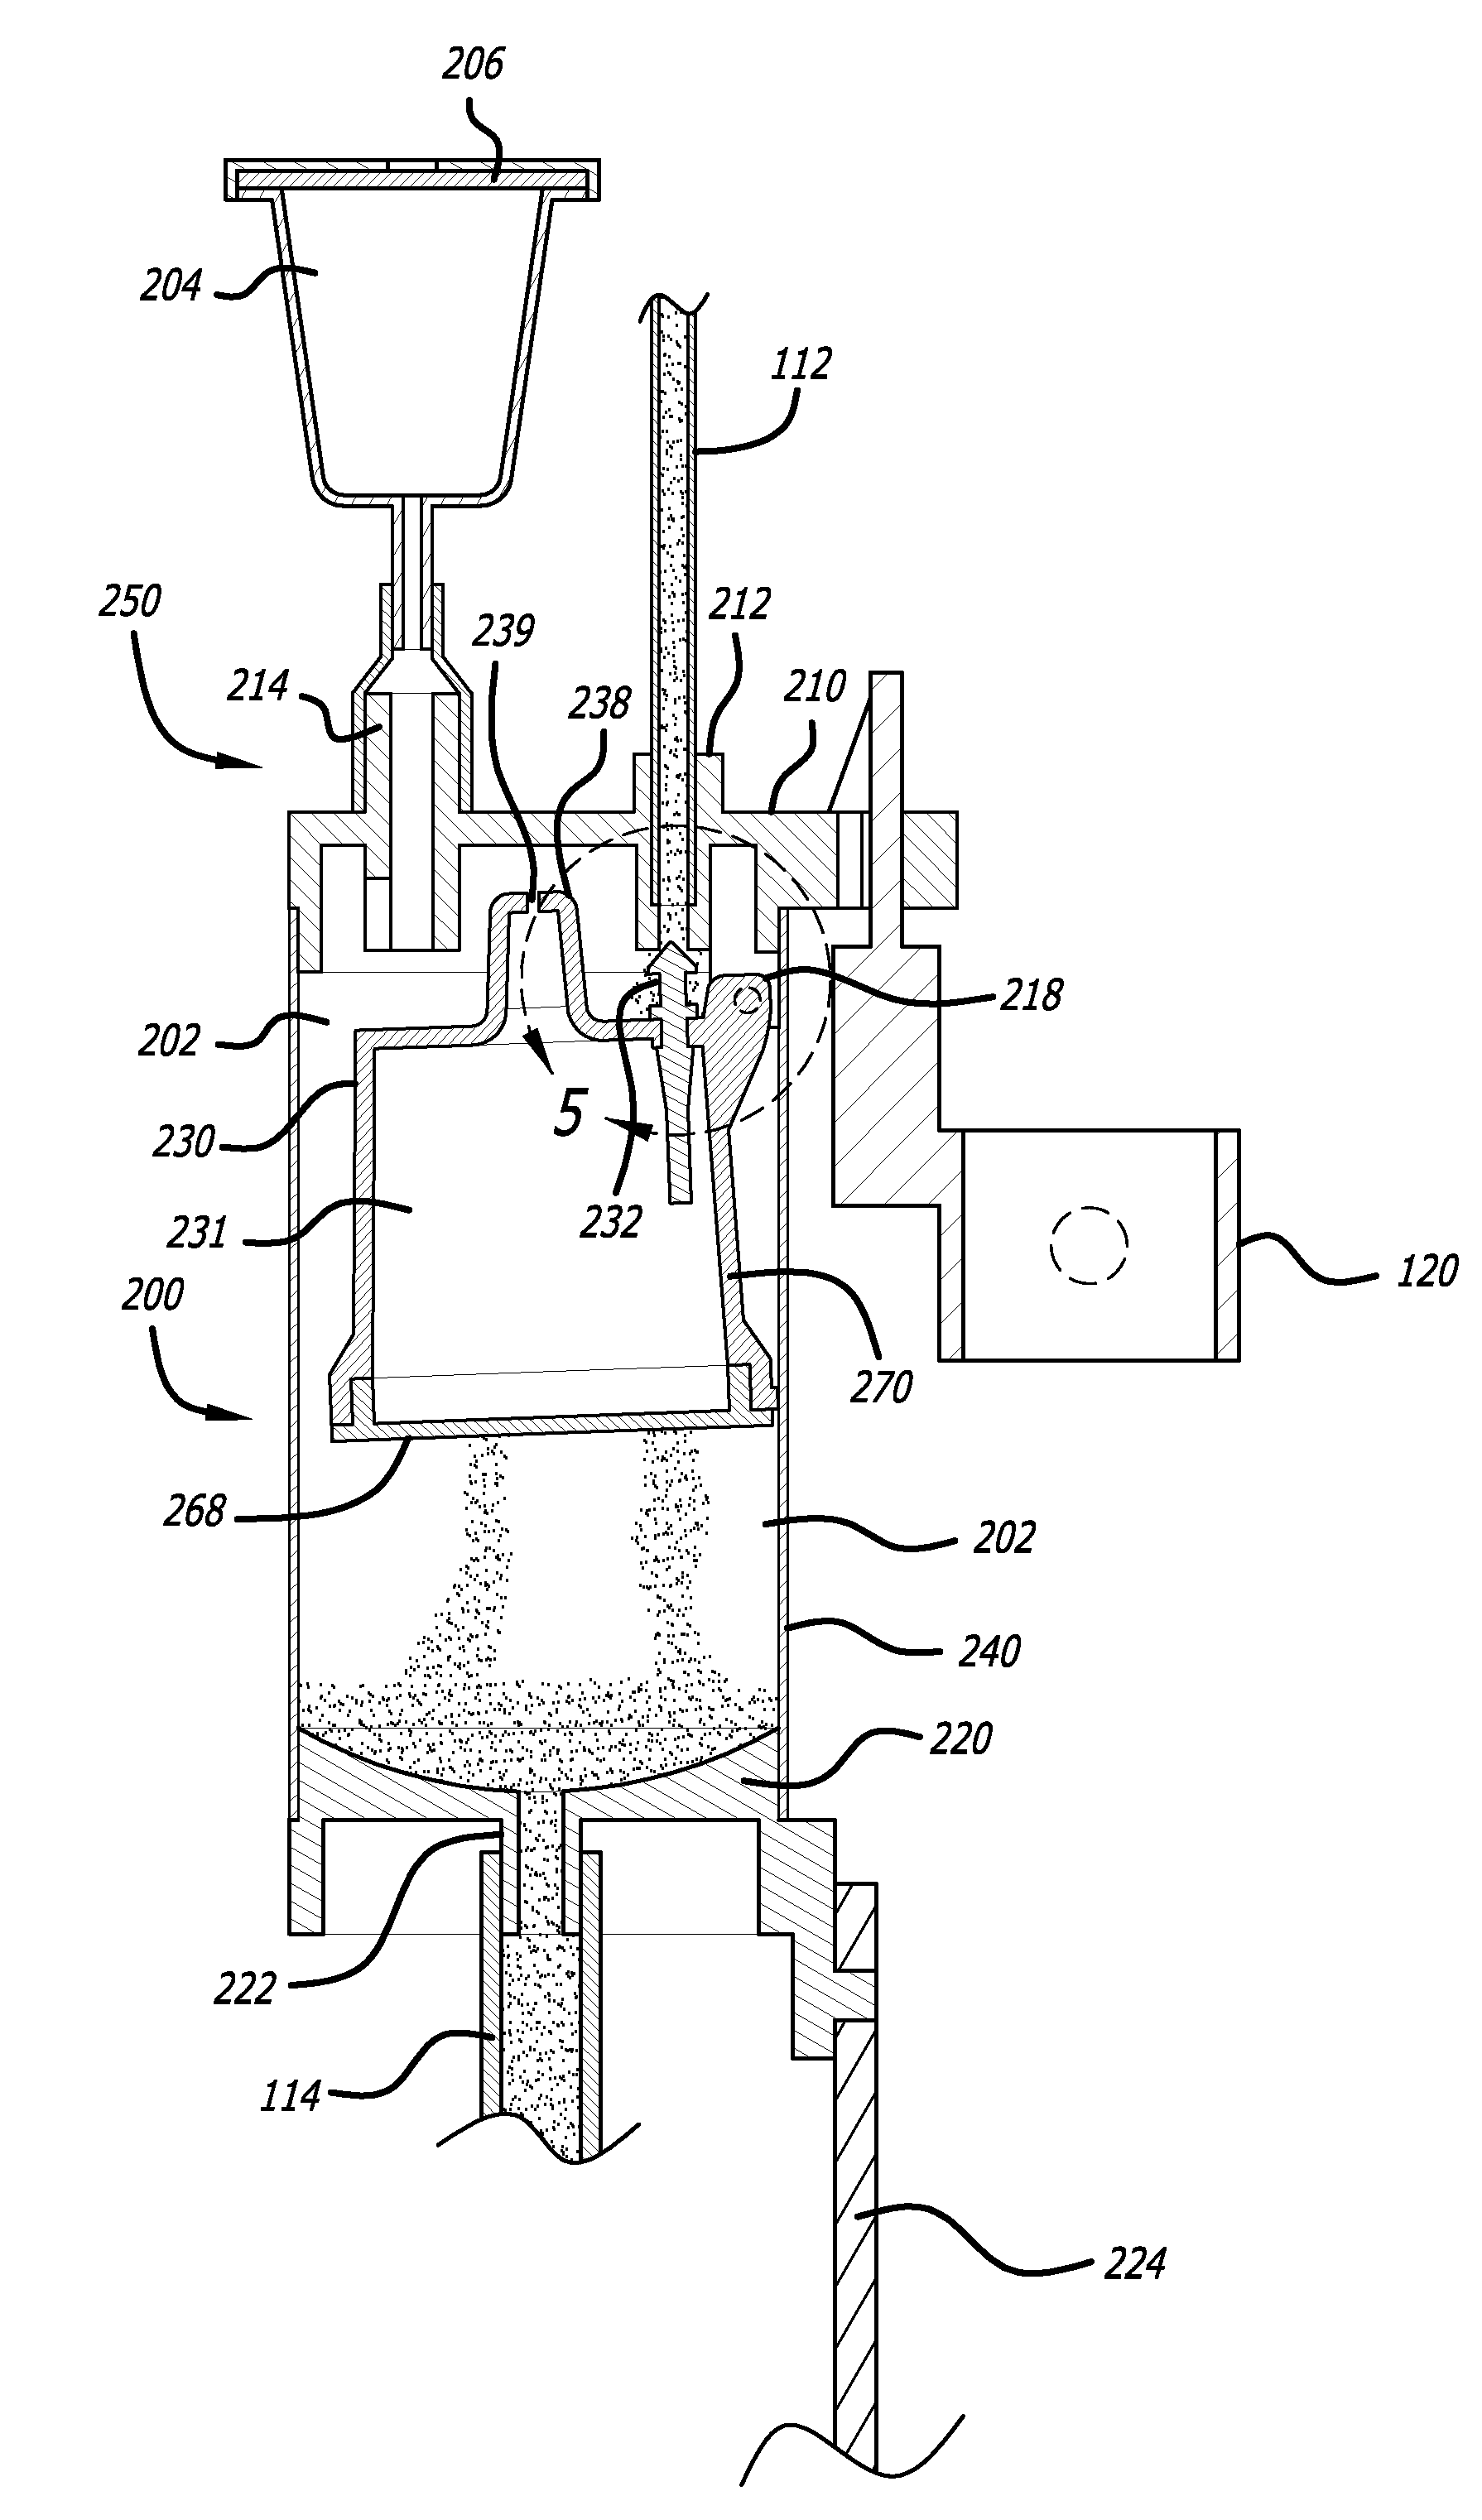 Volume limiting bodily fluid drainage system